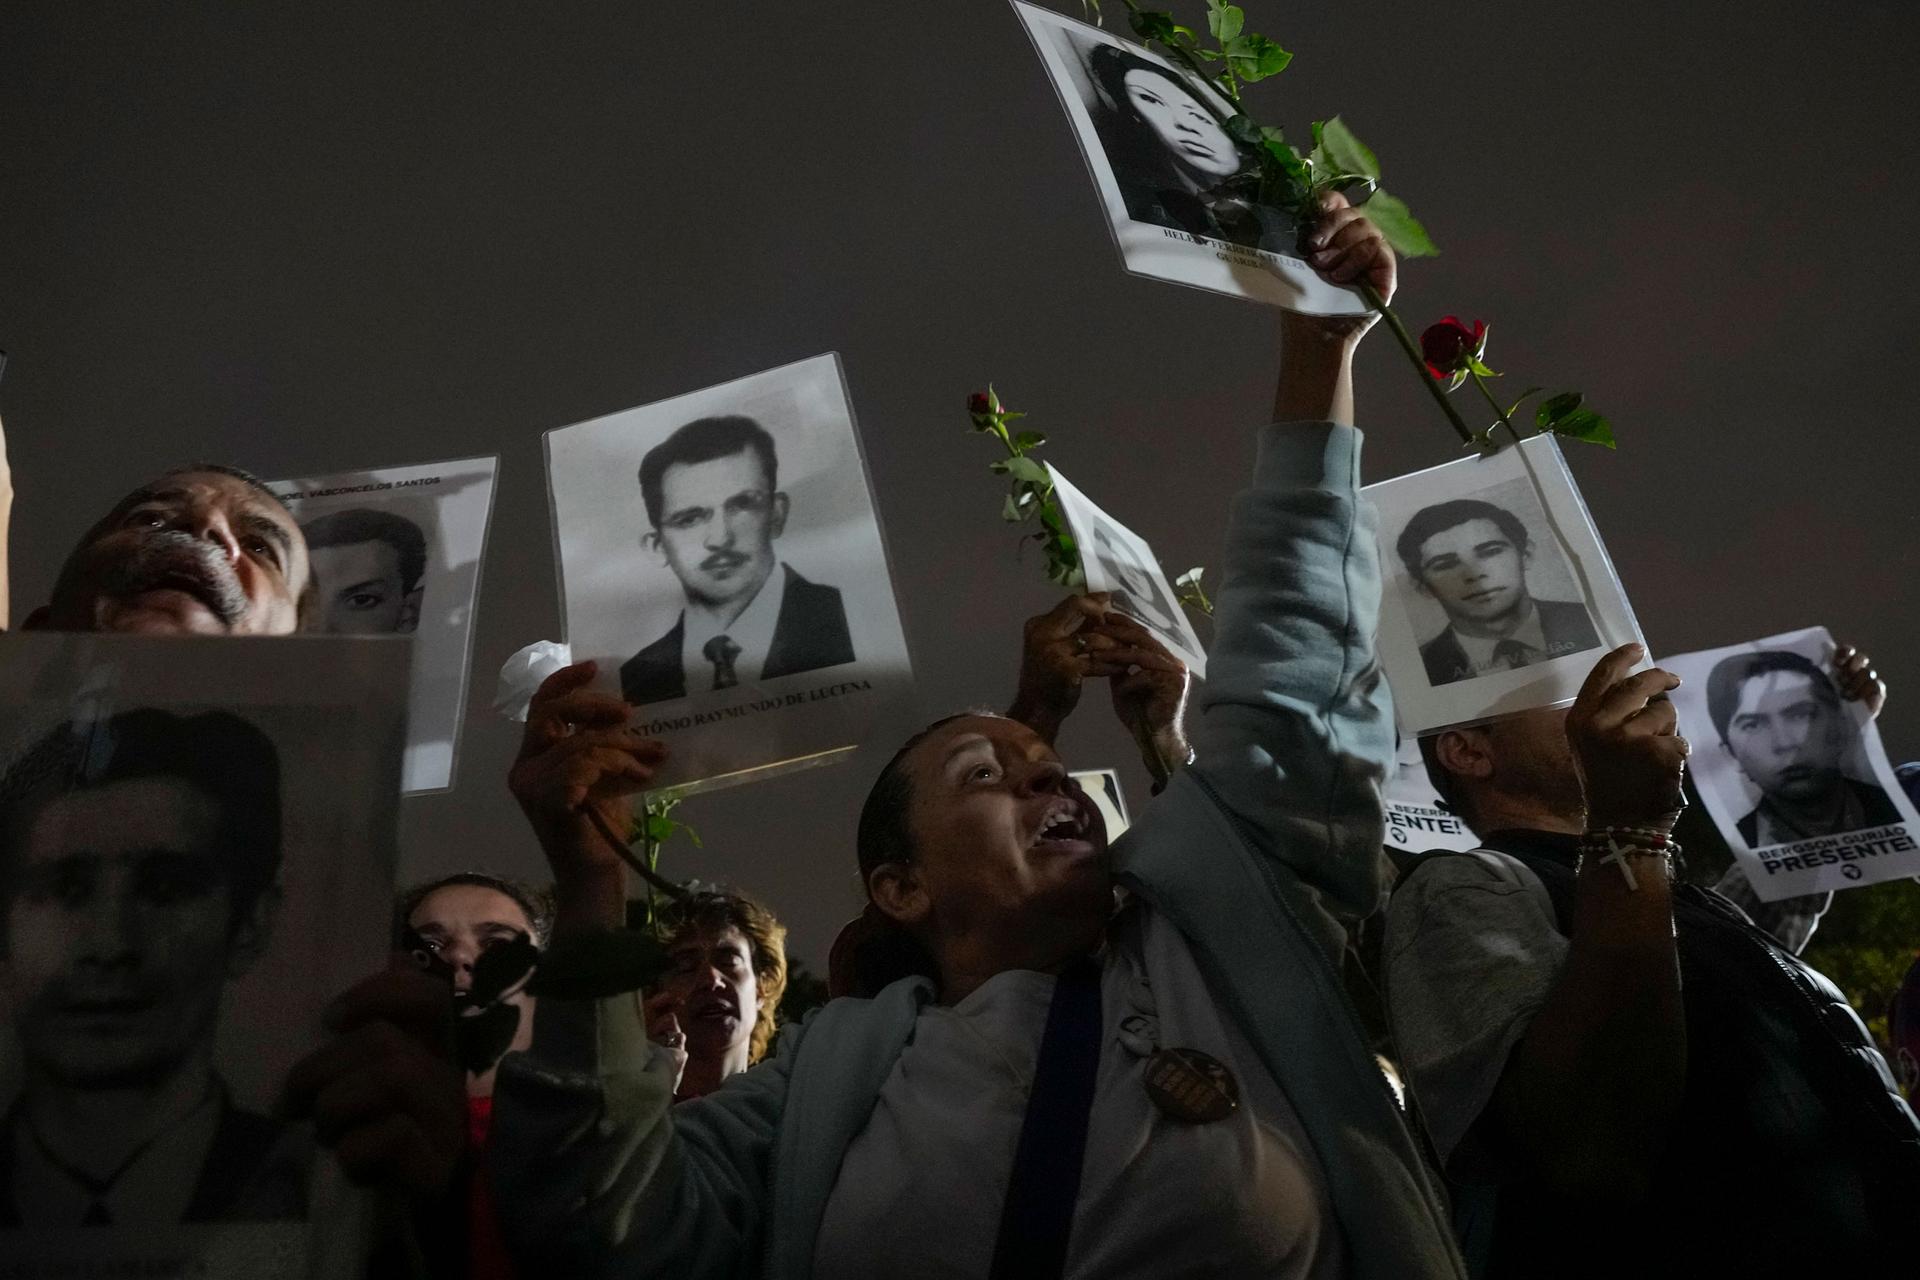 Demonstrators hold photos of persons who were killed during Brazil's past dictatorship during the 